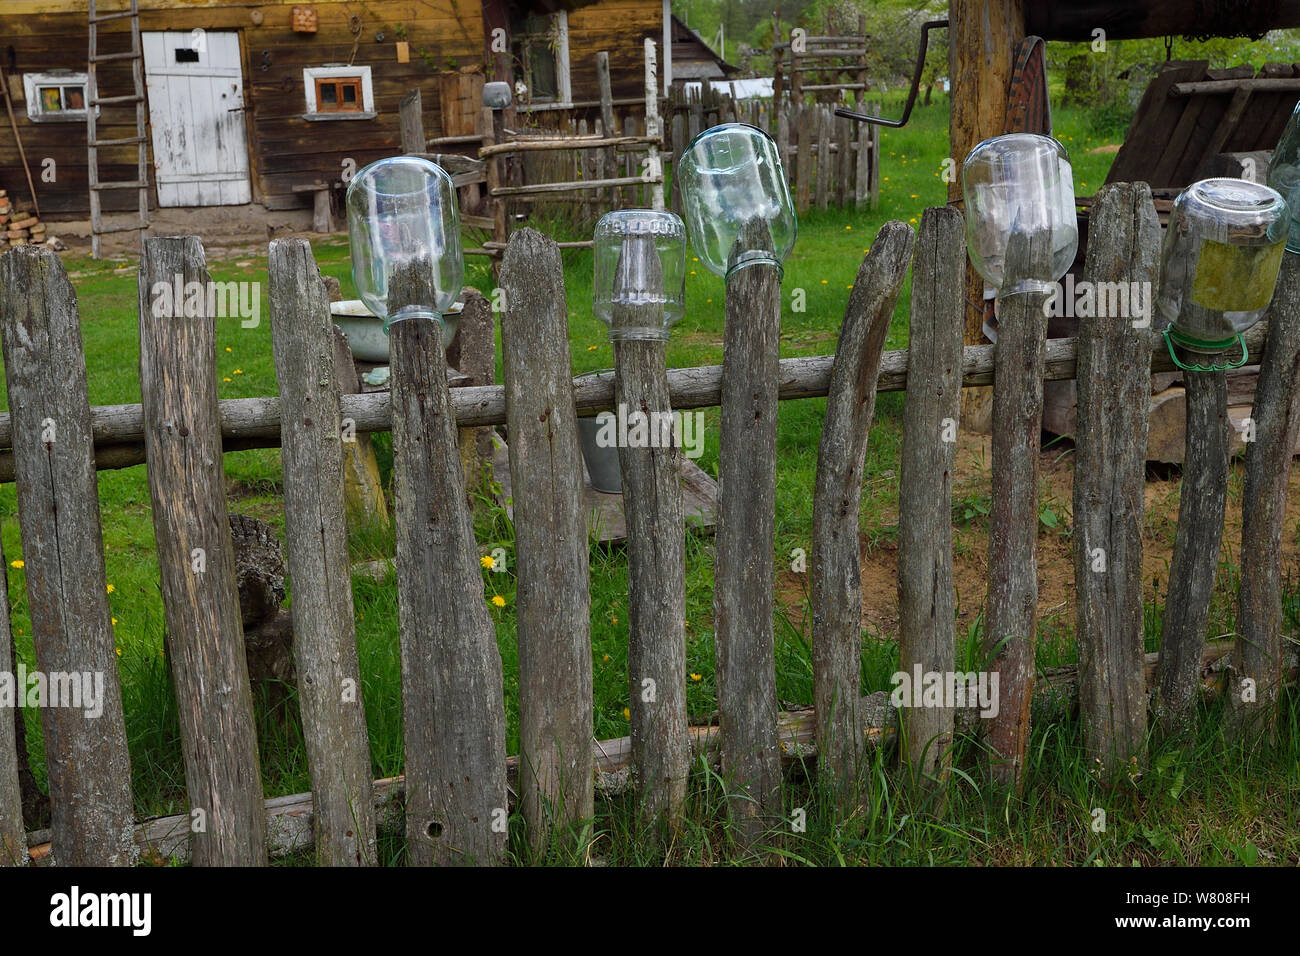 Fence post with glass jars on fence outside house, Musteika Village, Lithuania, May 2015. Stock Photo